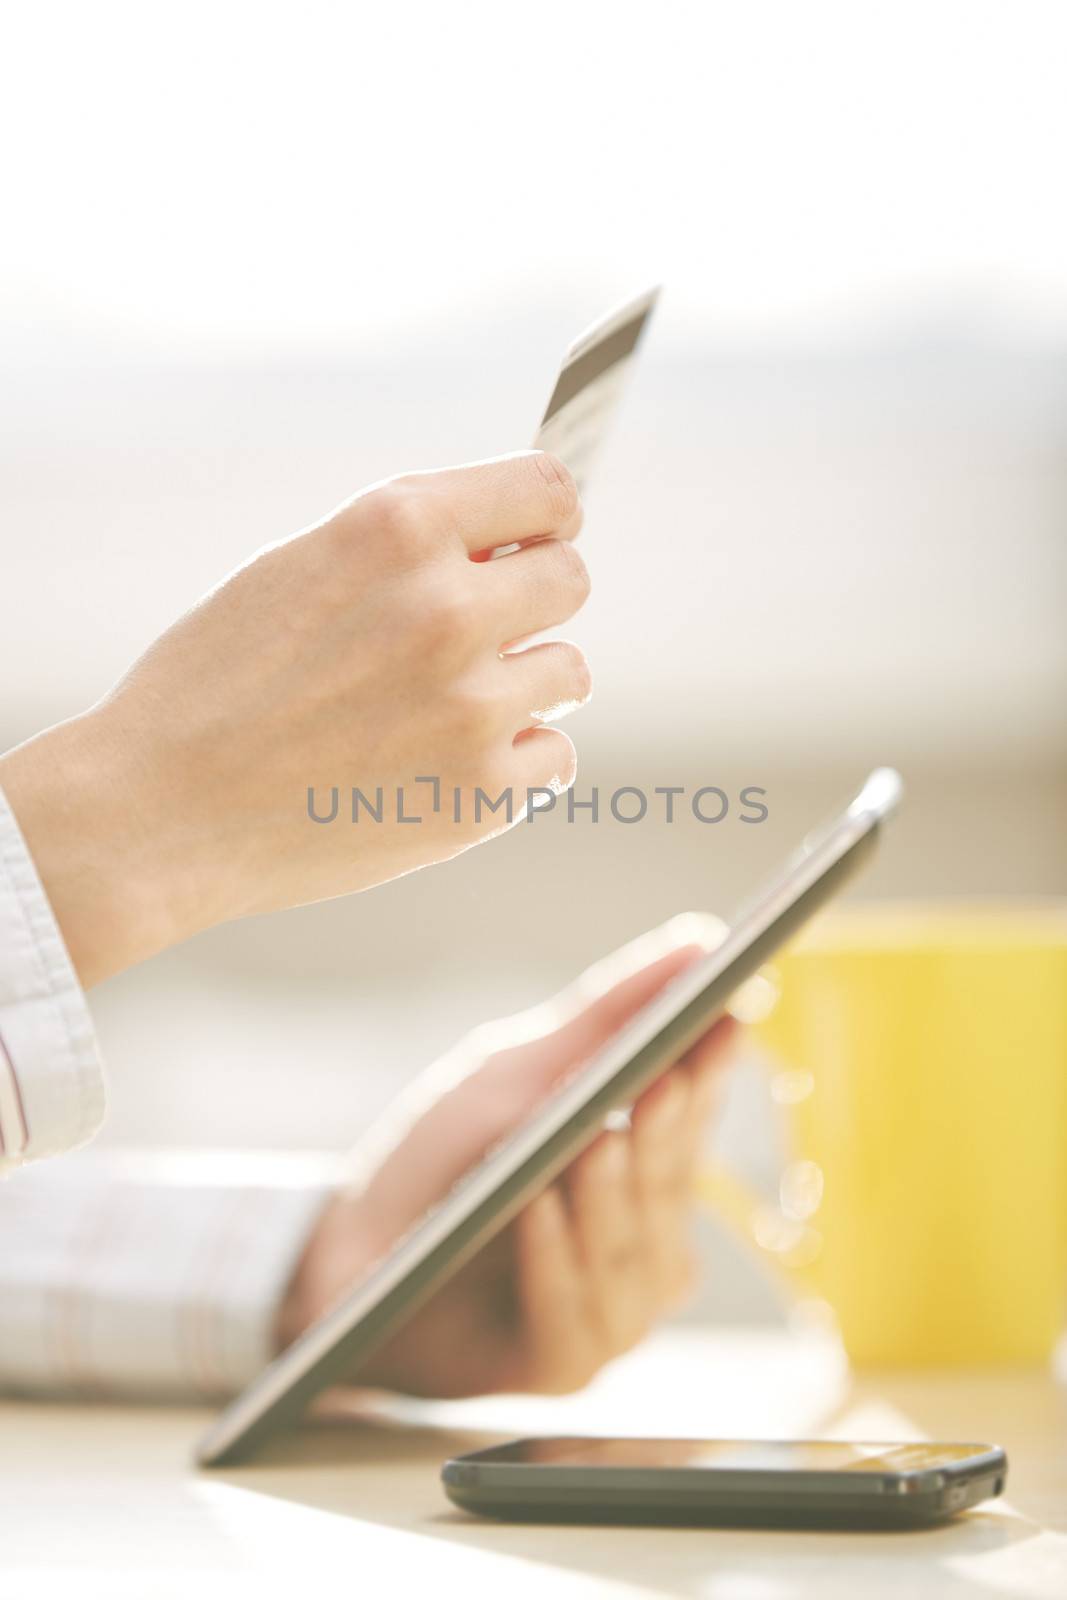 Human hand with tablet PC and credit card during lunch